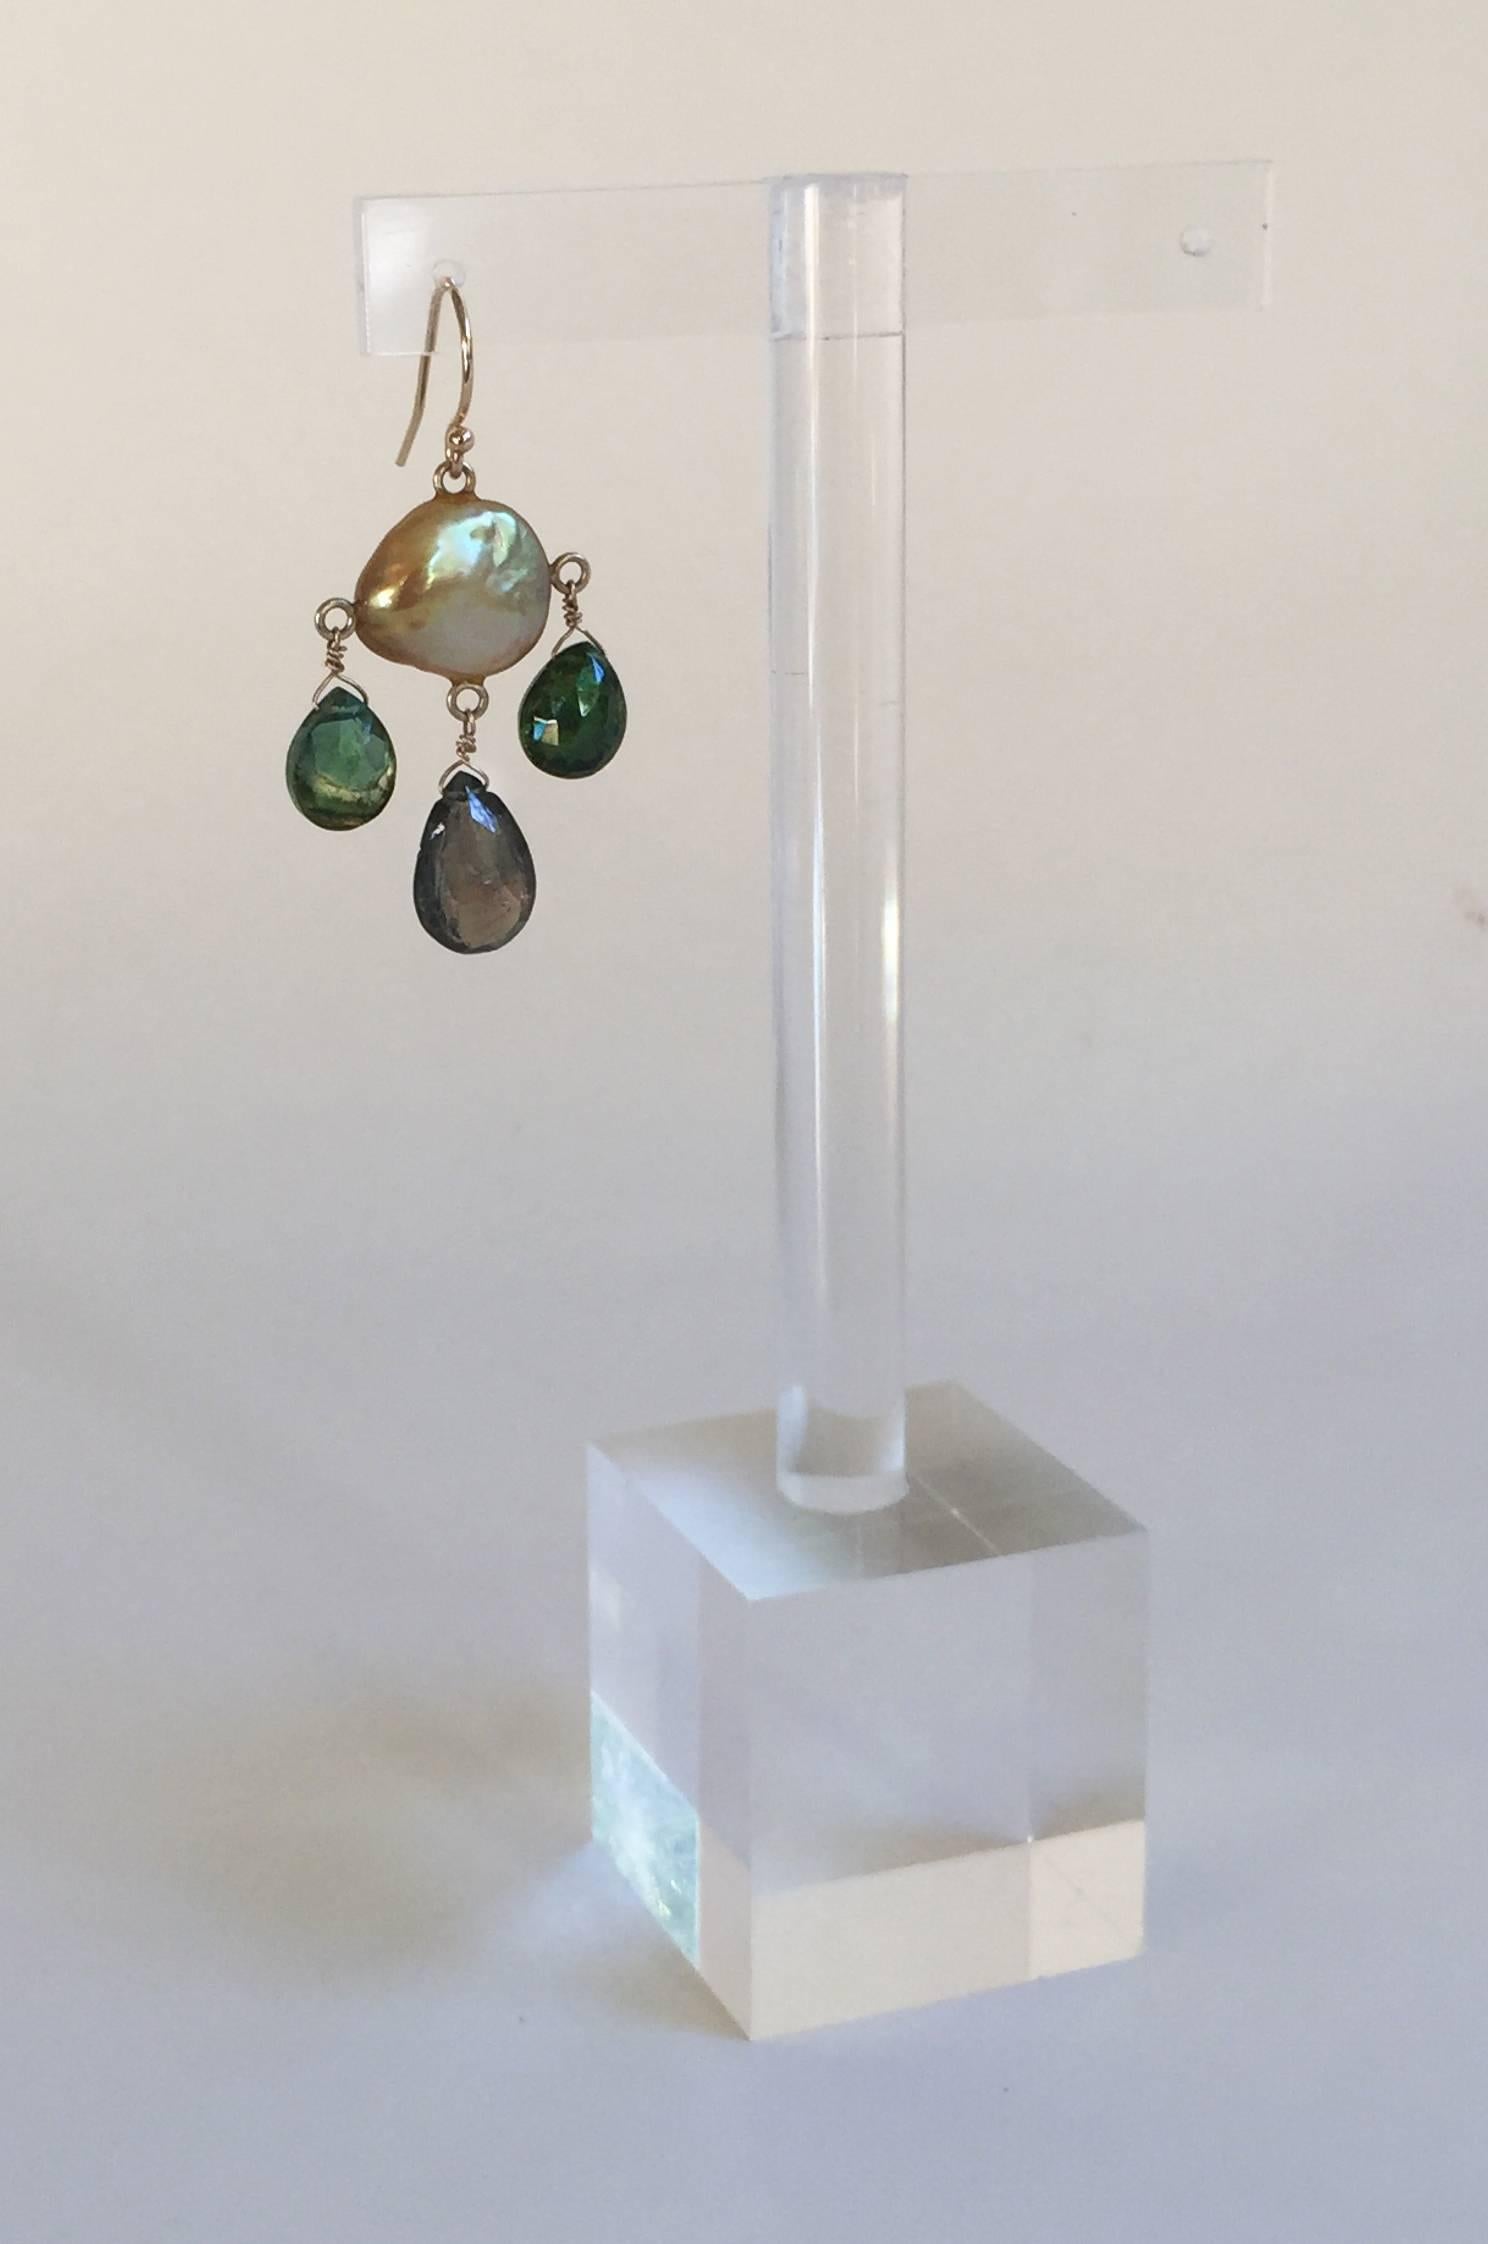 The golden hue of the coin pearls is accented by dark forest green tourmaline briolettes. The earrings are completed with 14k yellow gold hook and wiring, perfect for the fall season. They hang at 1.75 inches to highlight the face and accentuate the